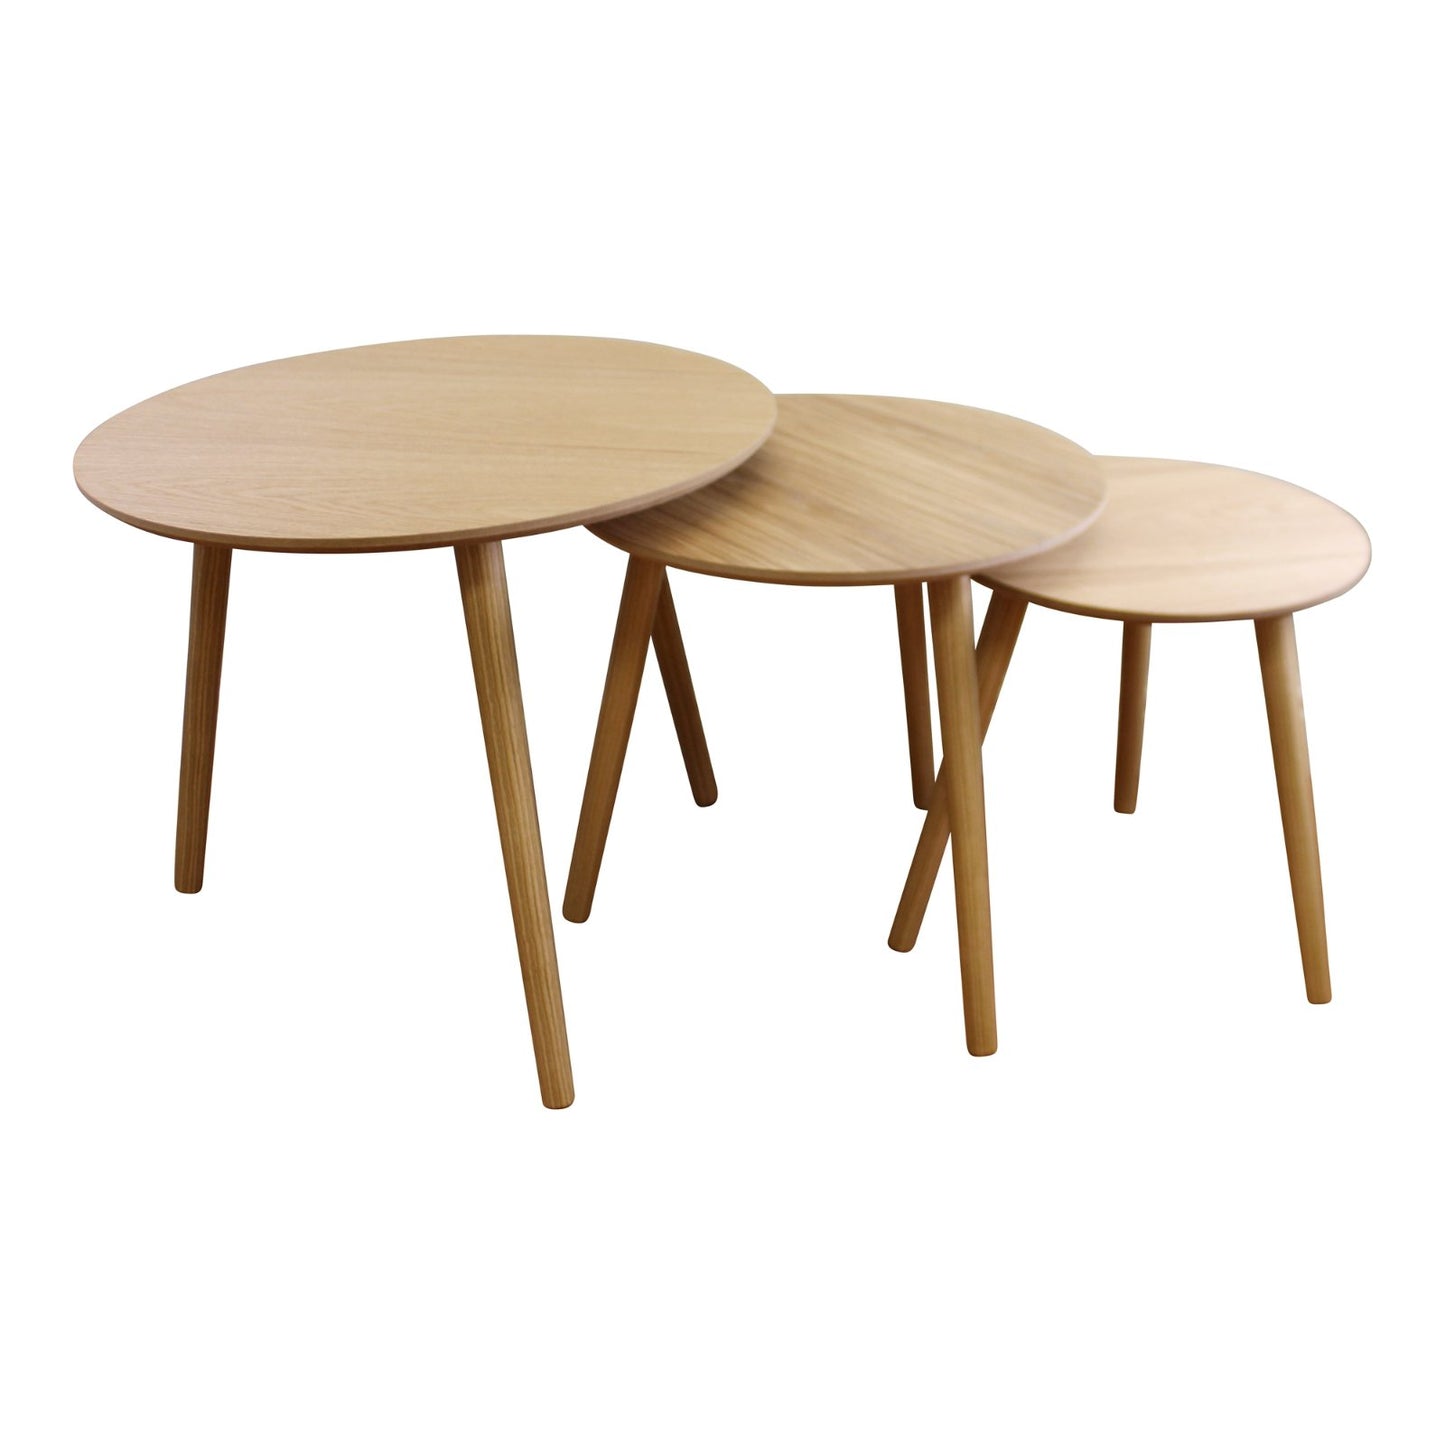 Set of 3 Round Nest Of Tables, Wooden Finish